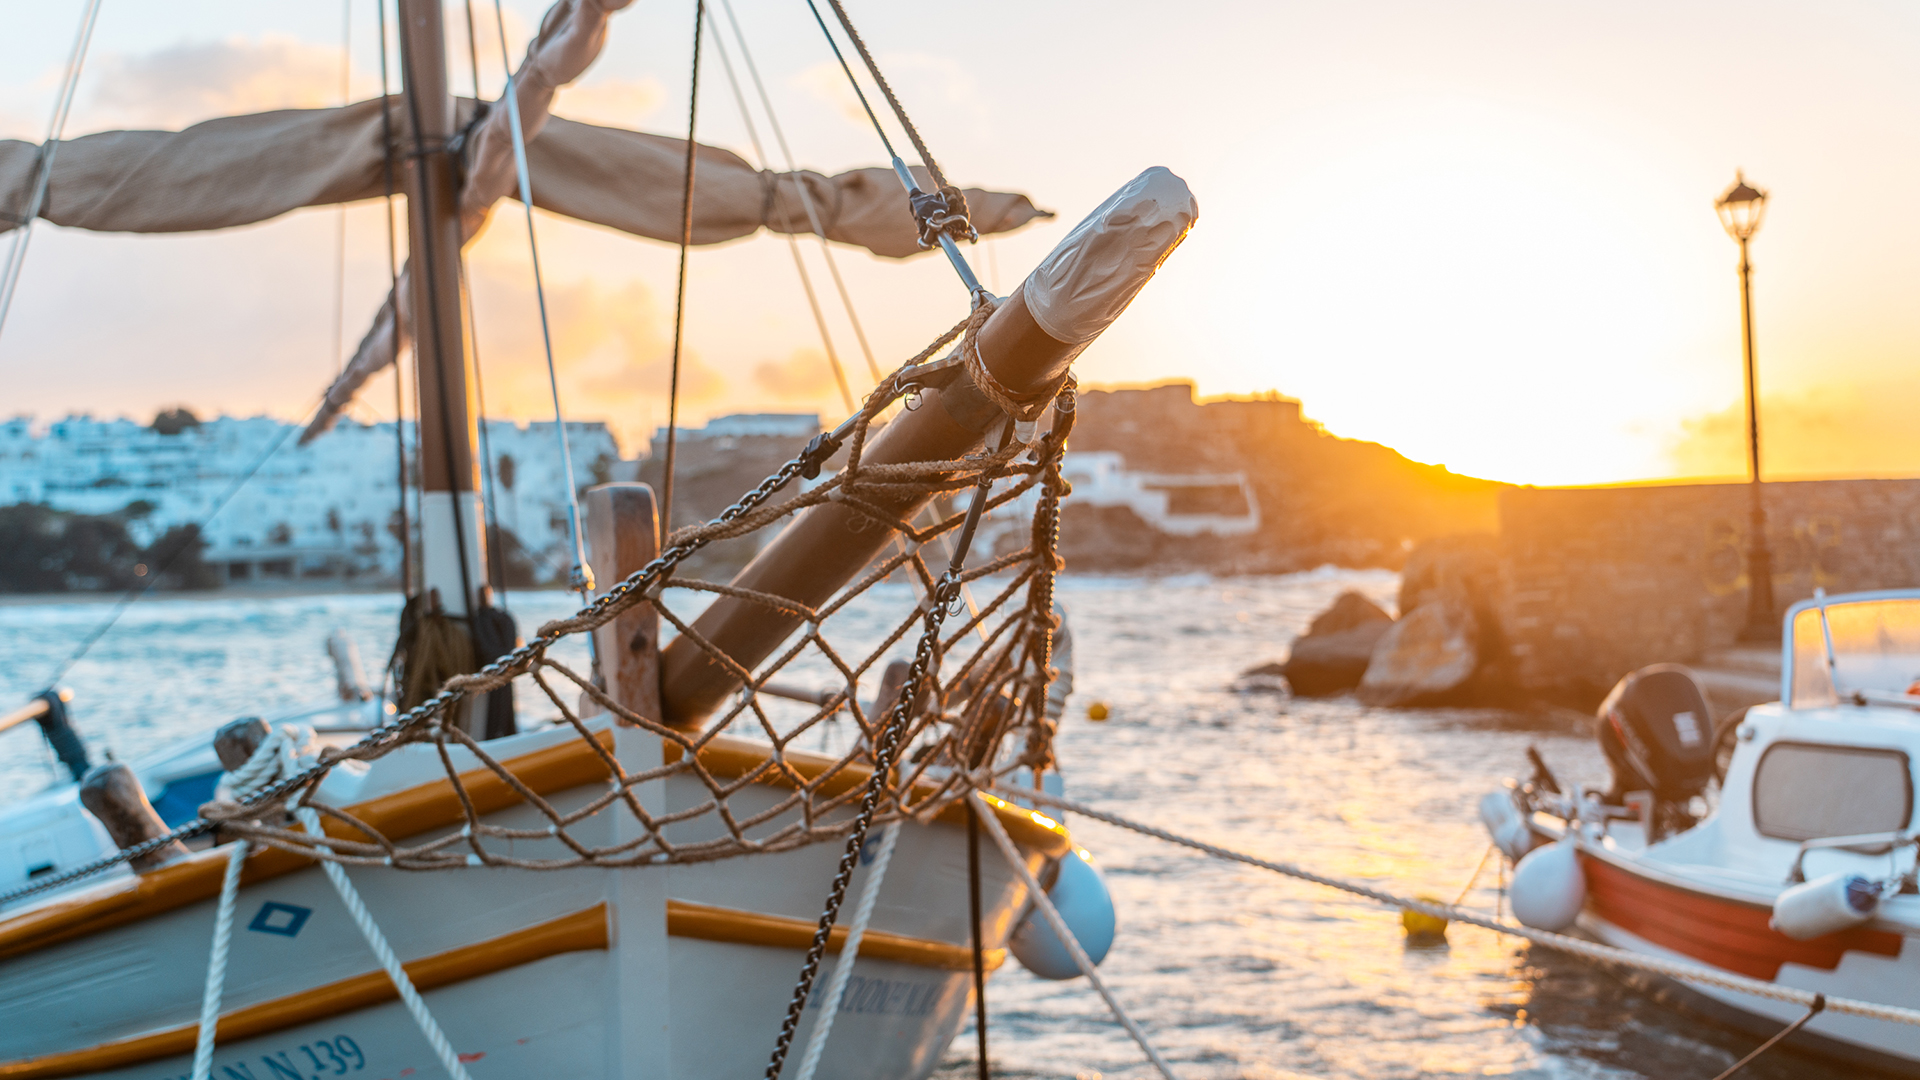 This image shows a traditional Greek wooden boat. In the background, Naoussa in Paros is washed in the sunset light.